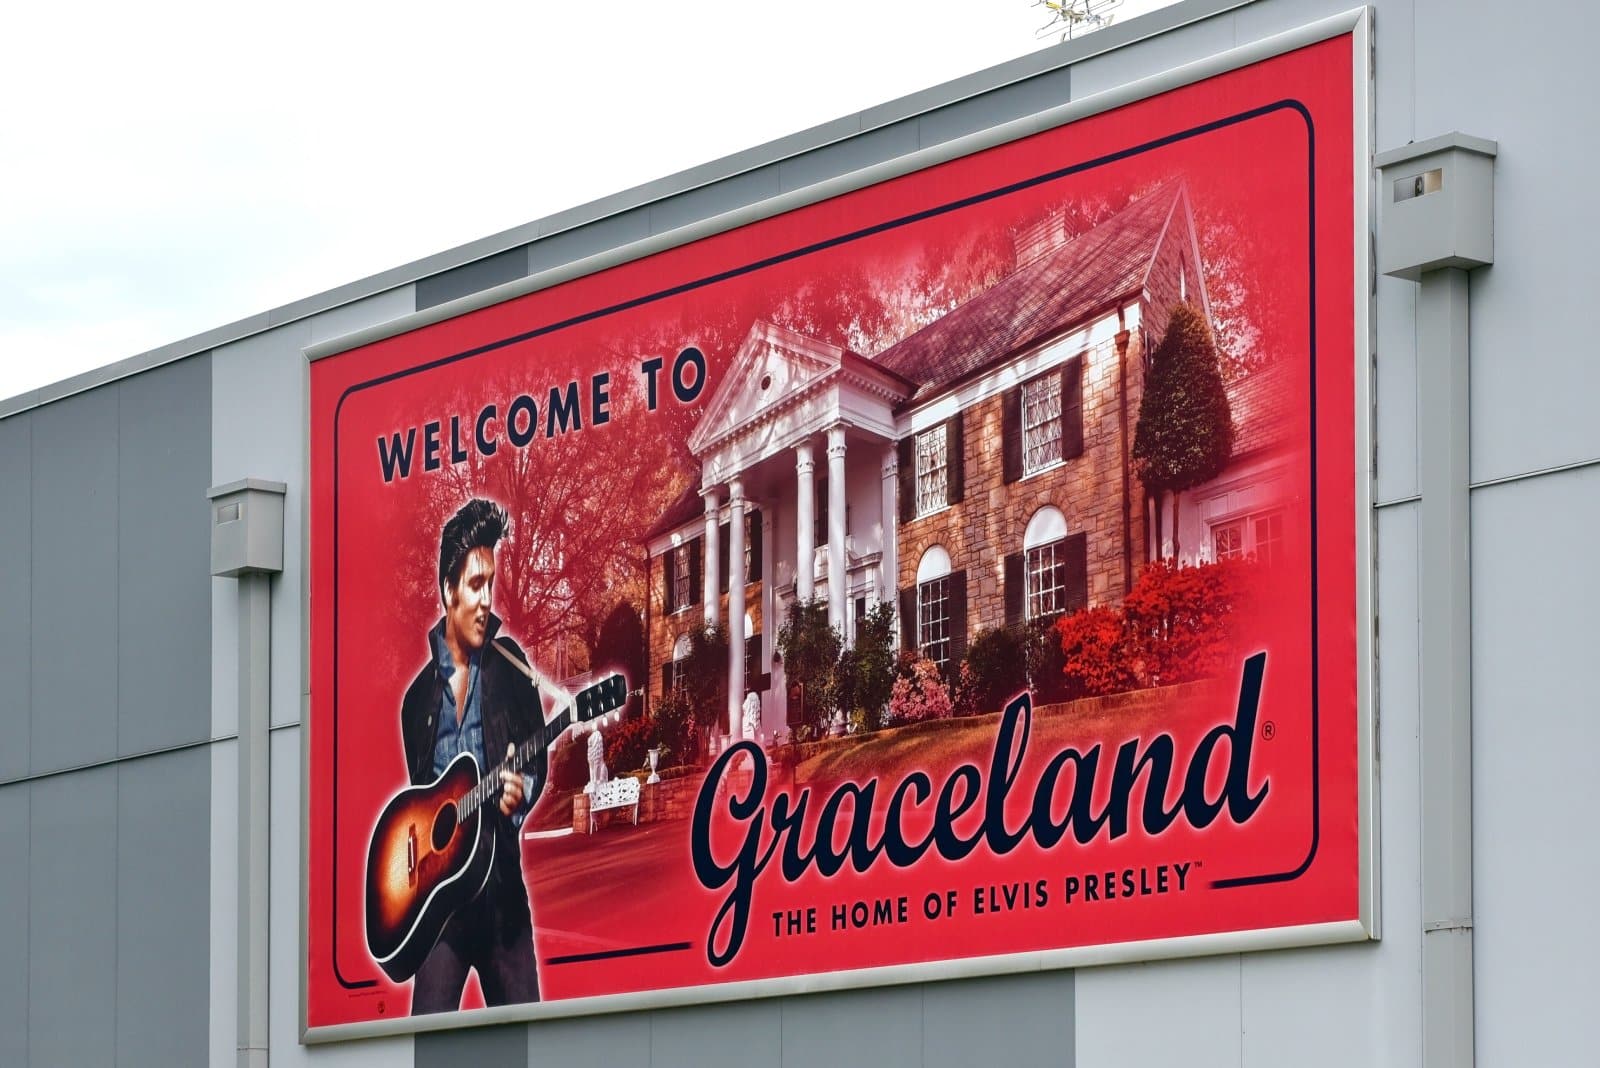 <p class="wp-caption-text">Image Credit: Shutterstock / Paul McKinnon</p>  <p><span>Graceland, the home of Elvis Presley, is a must-visit for fans of the King. This mansion-turned-museum displays Elvis’s memorabilia, costumes, and automobiles, offering a glimpse into the private life of one of music’s greatest icons.</span></p>